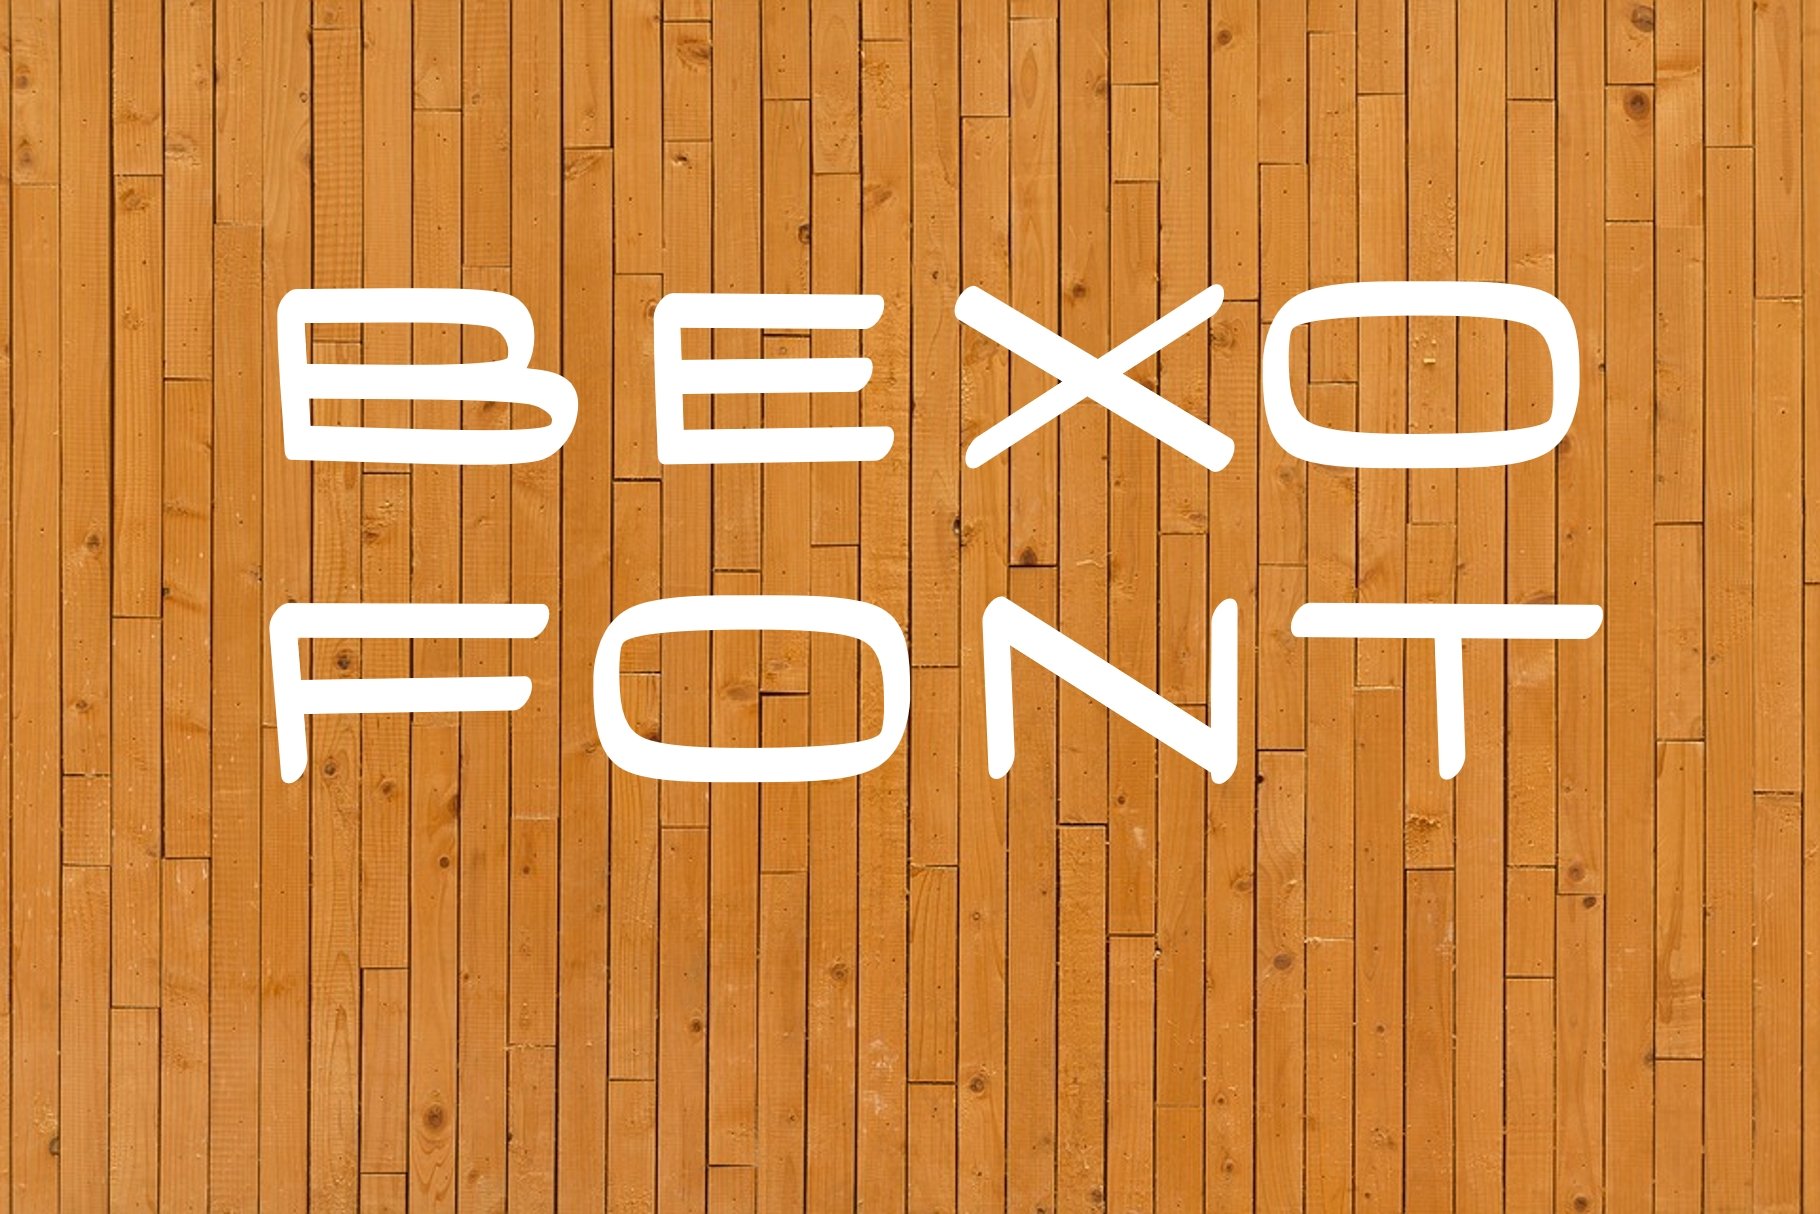 Bexo Font cover image.